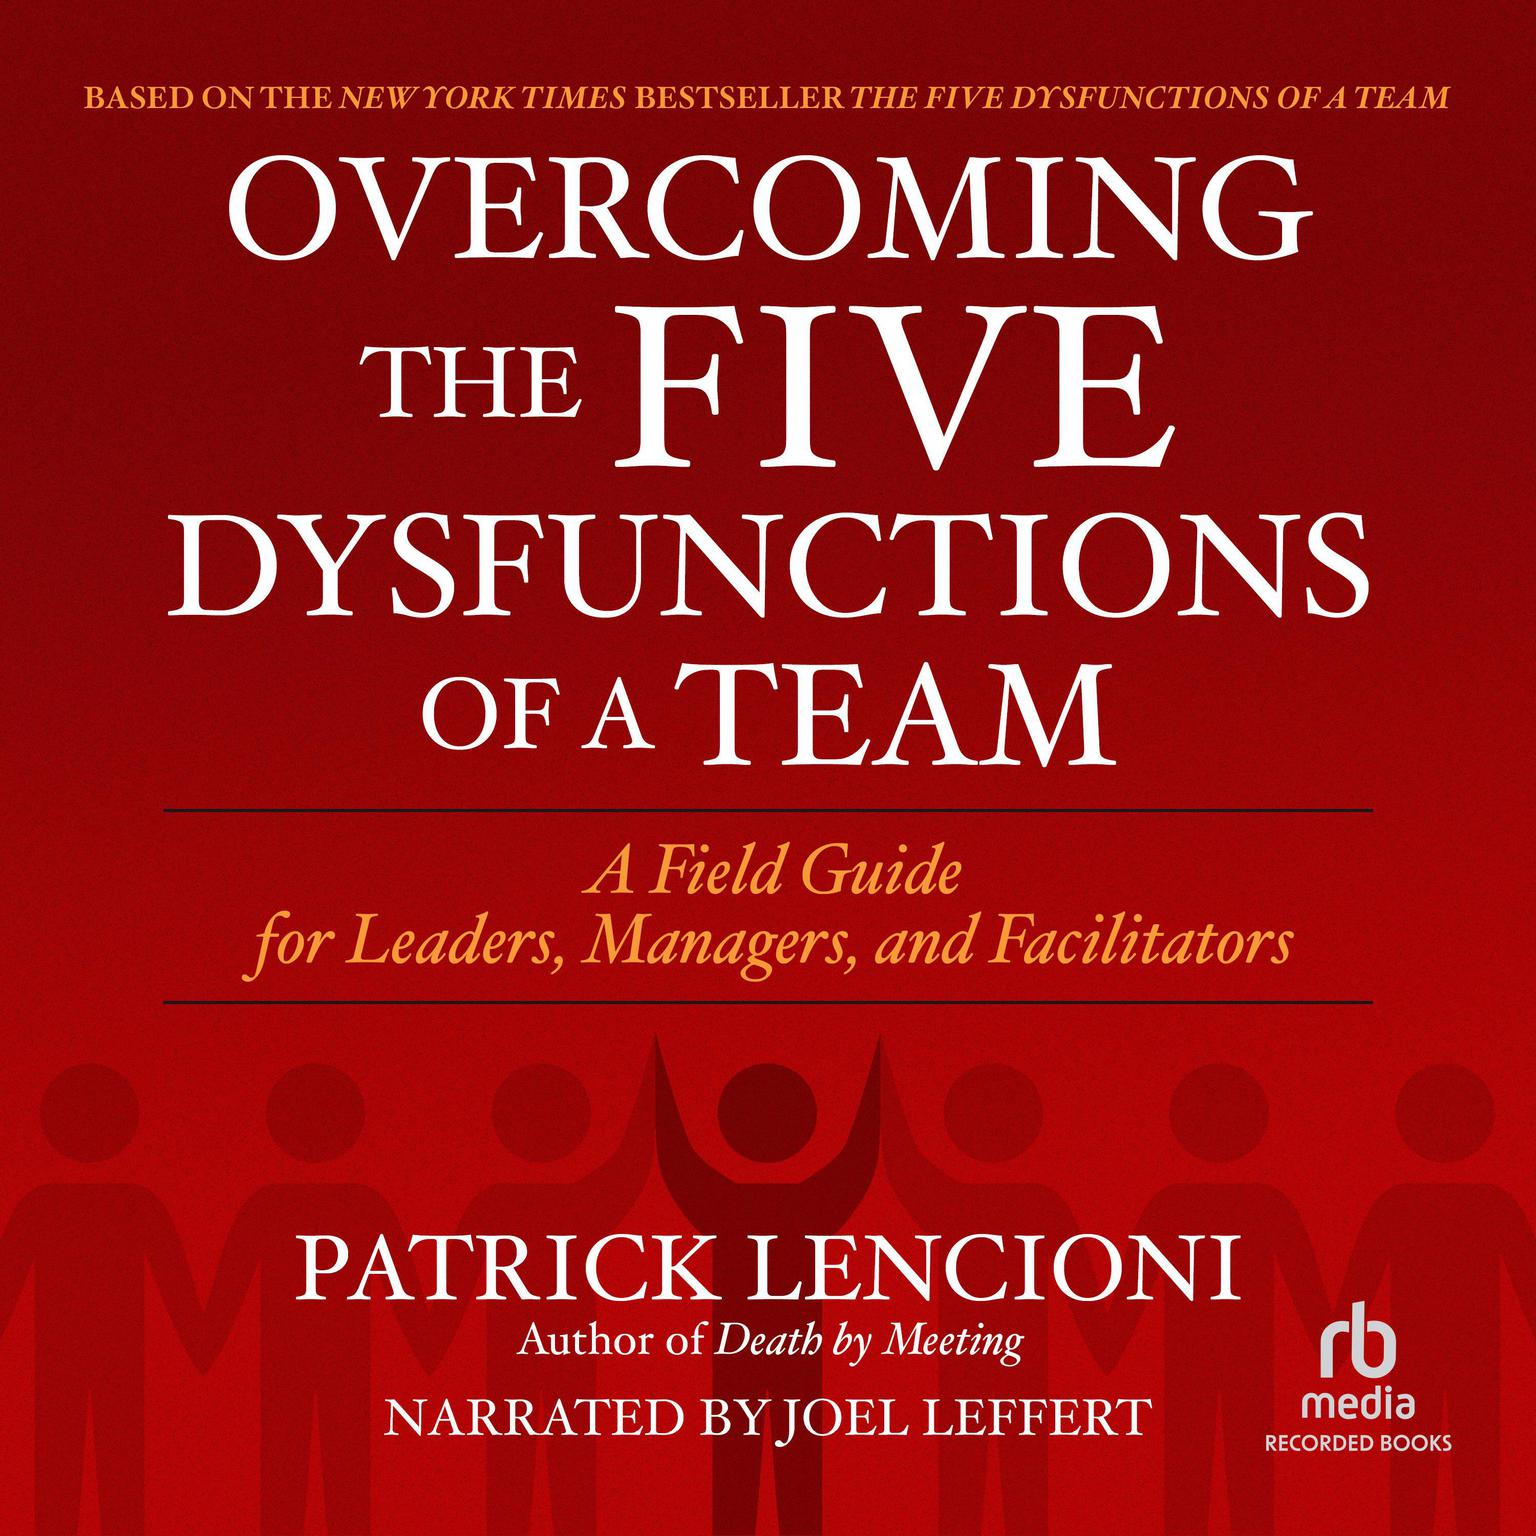 Overcoming the Five Dysfunctions of a Team: A Field Guide for Leaders, Managers, and Facilitators Audiobook, by Patrick Lencioni